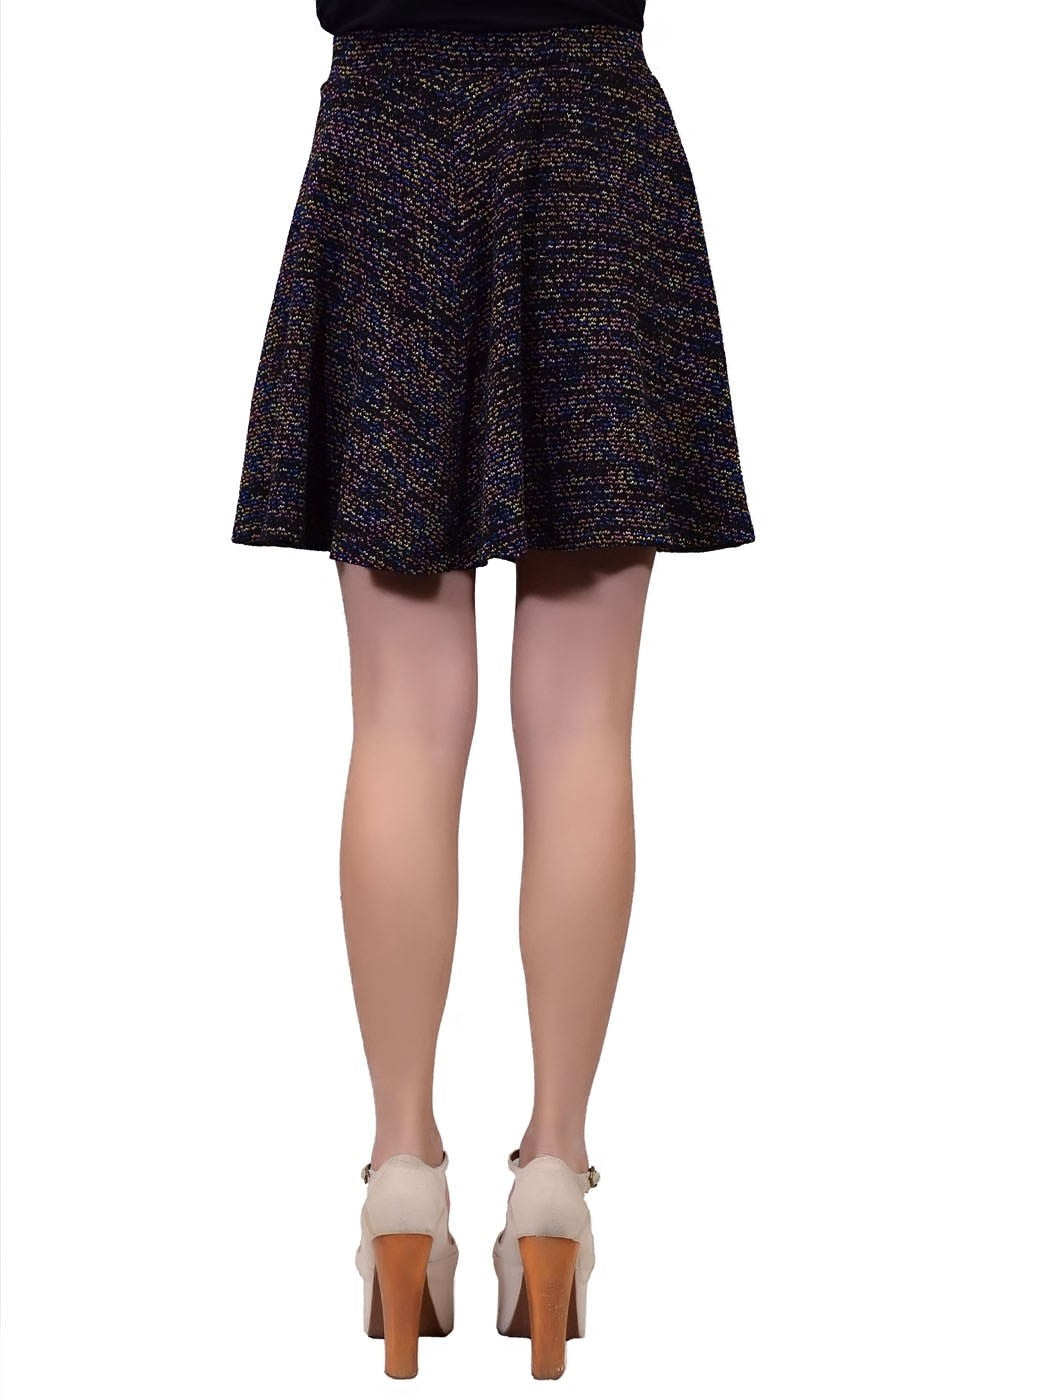 Basil And Lola Cute And Girly Black Multicolored Speckled Skater Style Skirt - ALILANG.COM